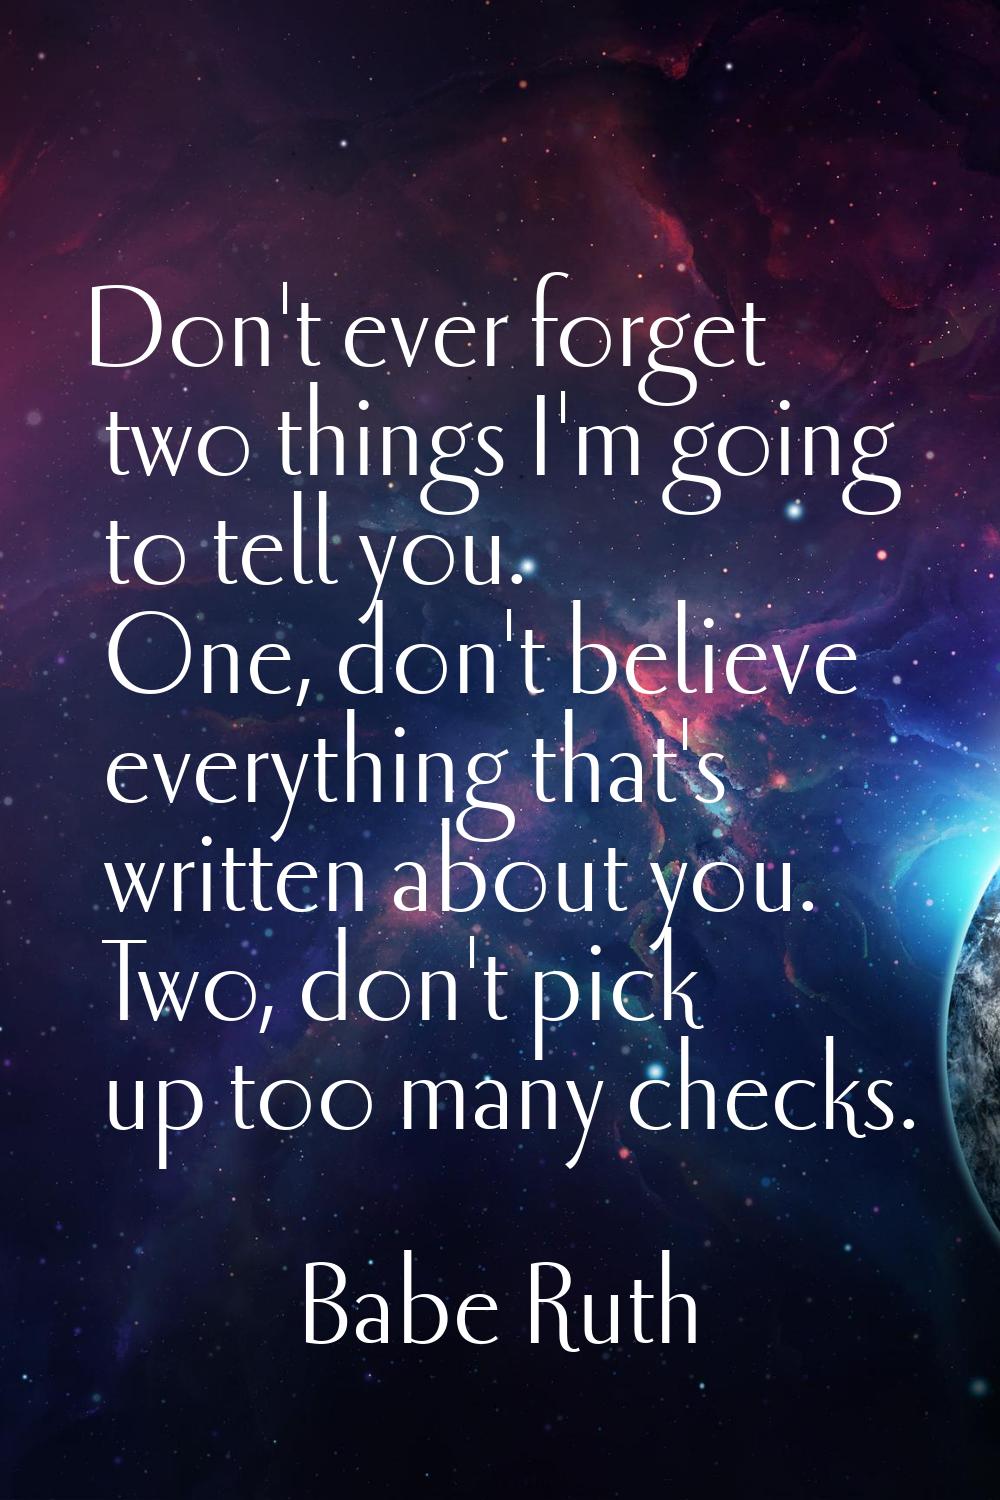 Don't ever forget two things I'm going to tell you. One, don't believe everything that's written ab